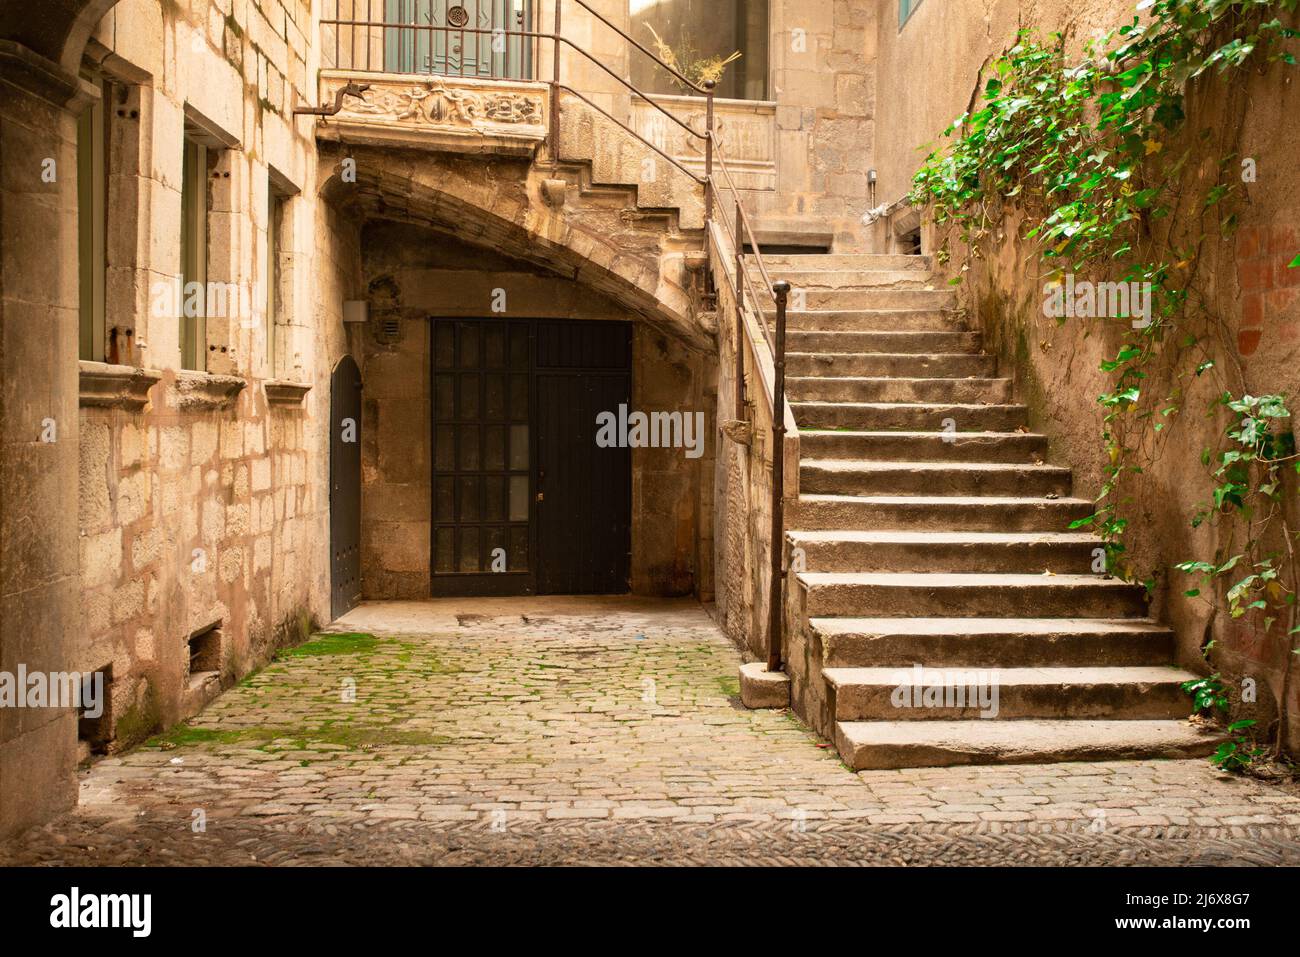 European courtyard with ancient architecture of stone, stairs, entrance door with ivy seen from Girona Spain. Stock Photo